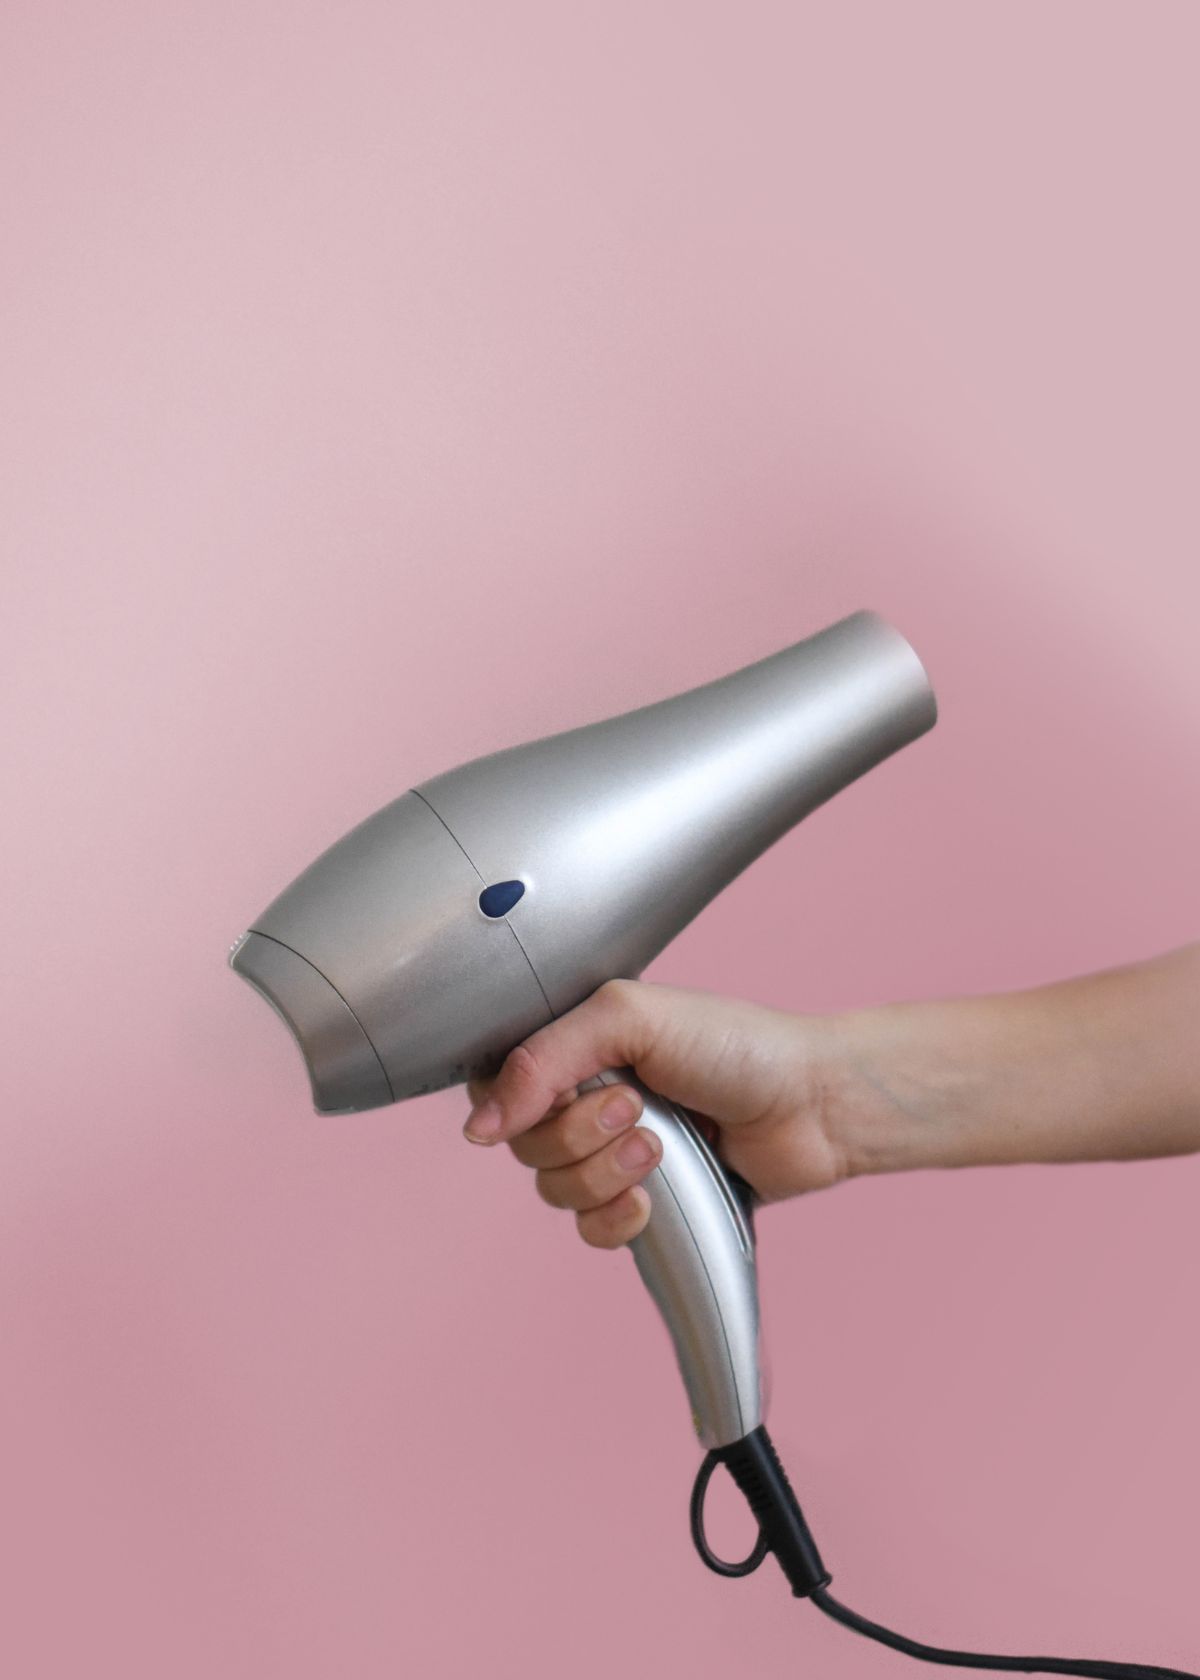 The Best Blow Dryer for Natural Hair